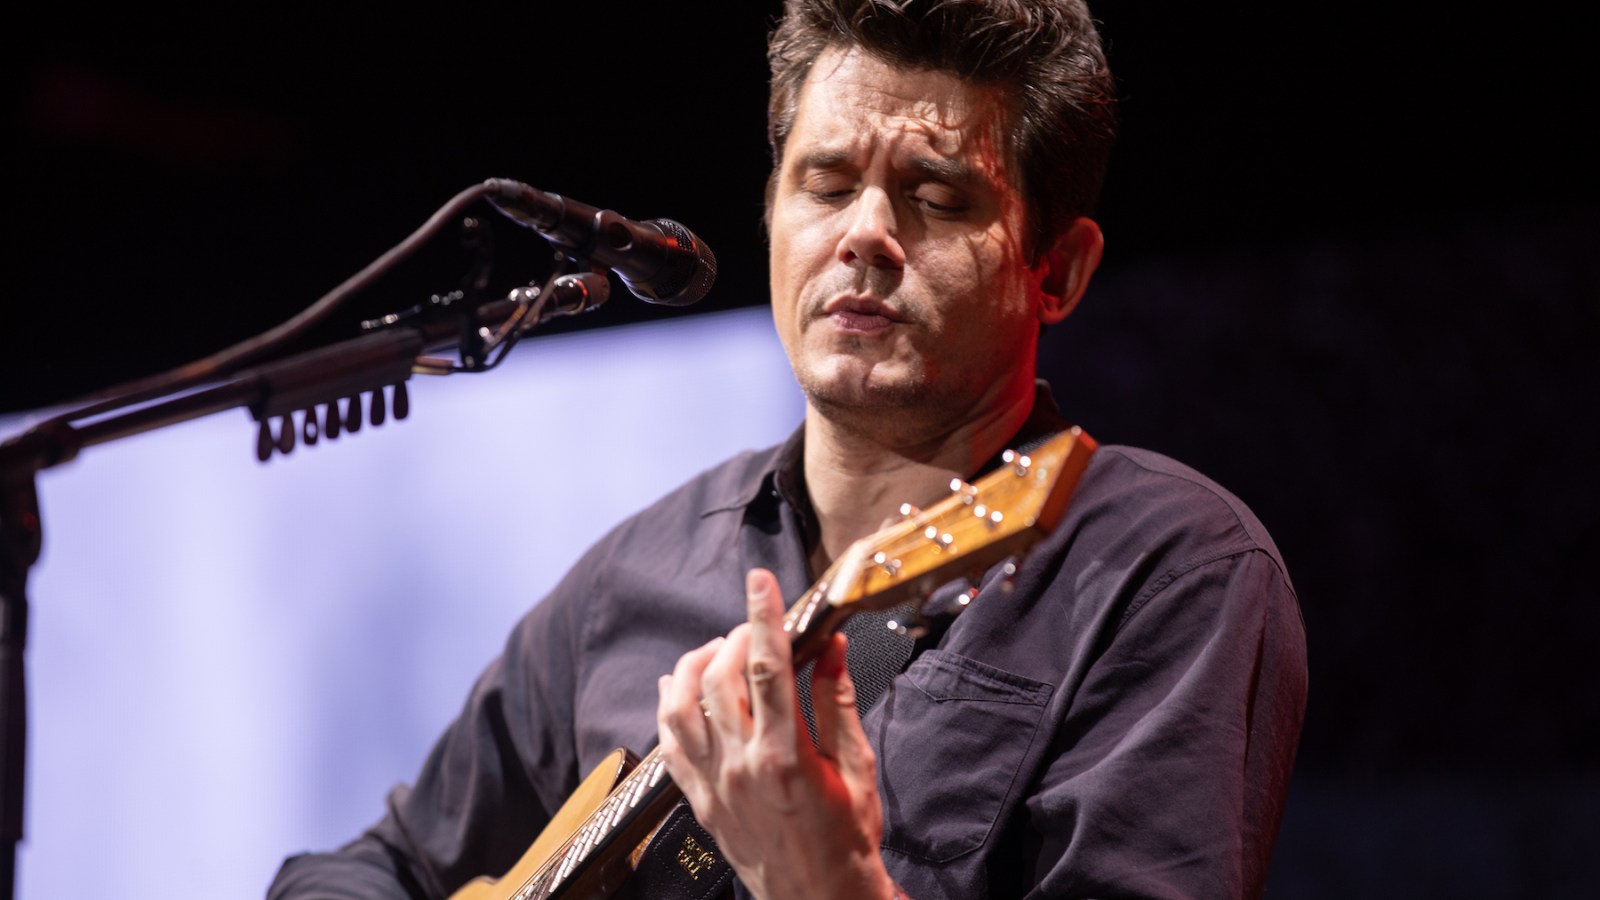 John Mayer Thanks Zach Bryan For Featuring Him On New Album: 'I'm Stunned'